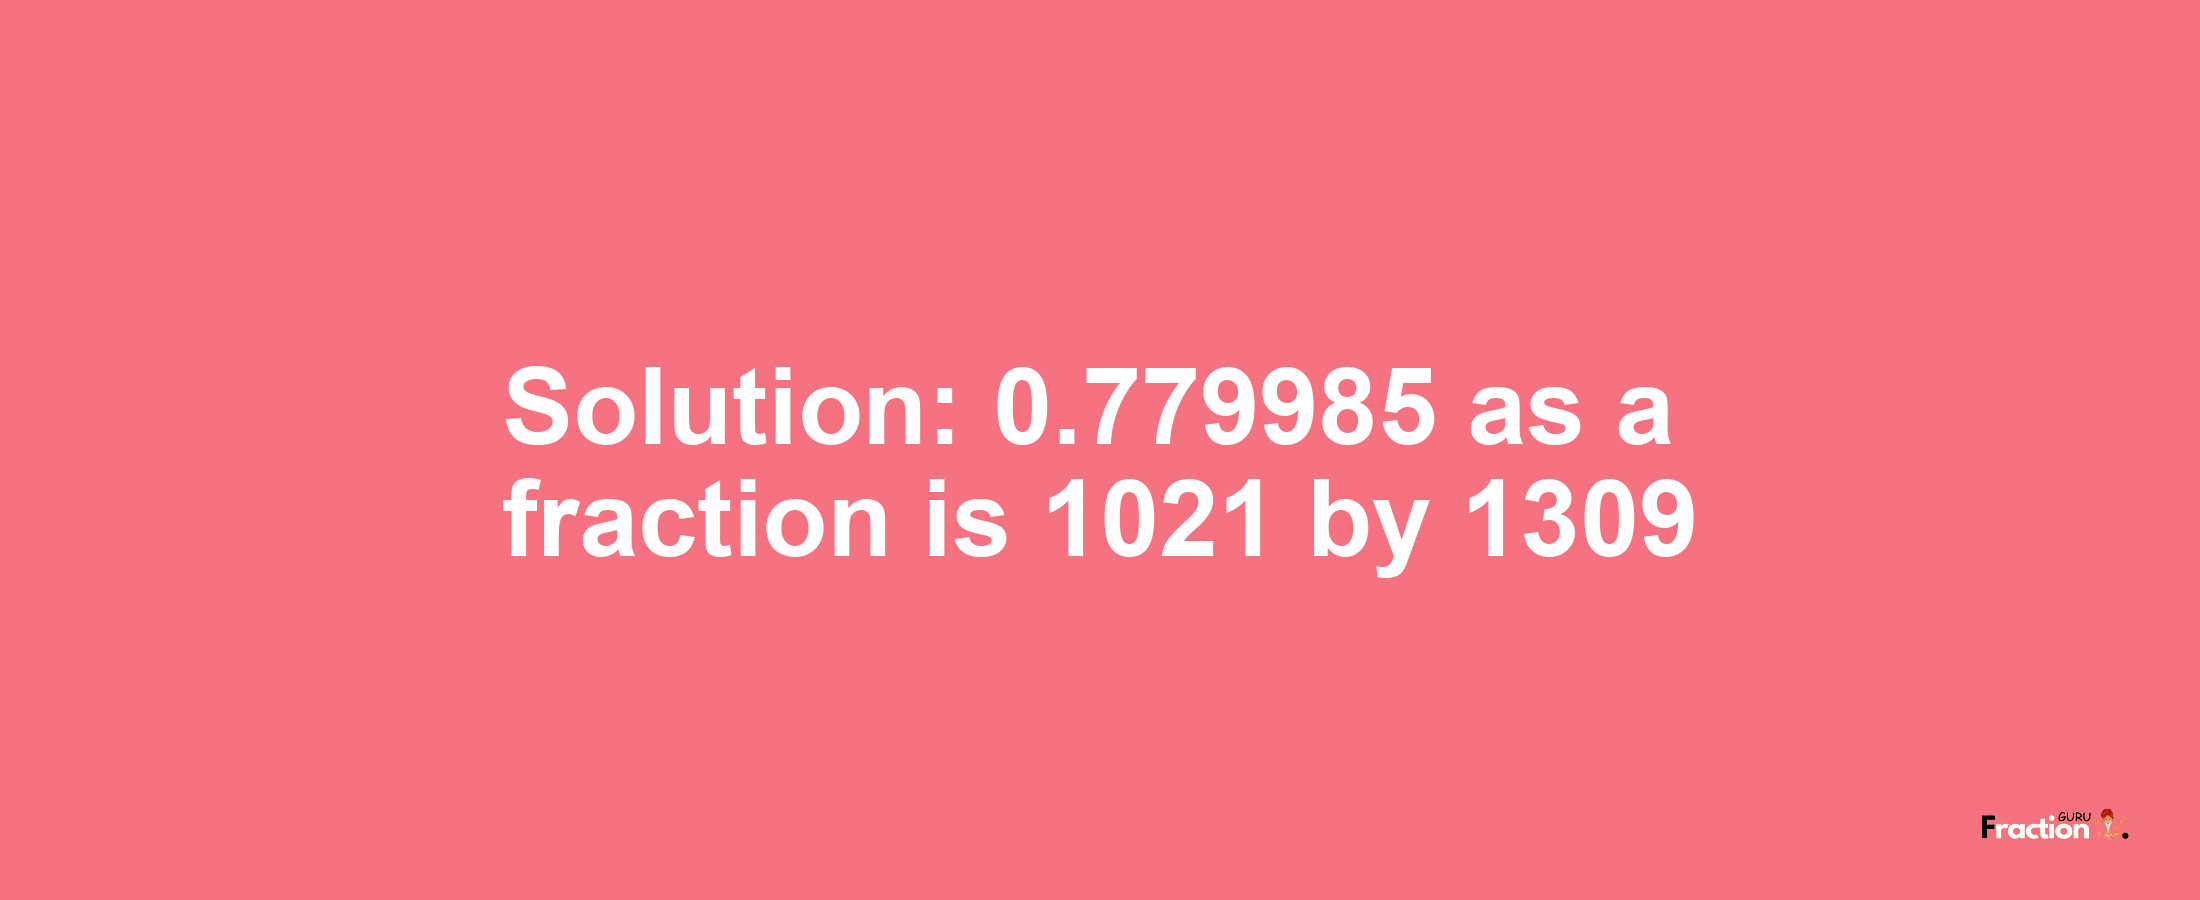 Solution:0.779985 as a fraction is 1021/1309